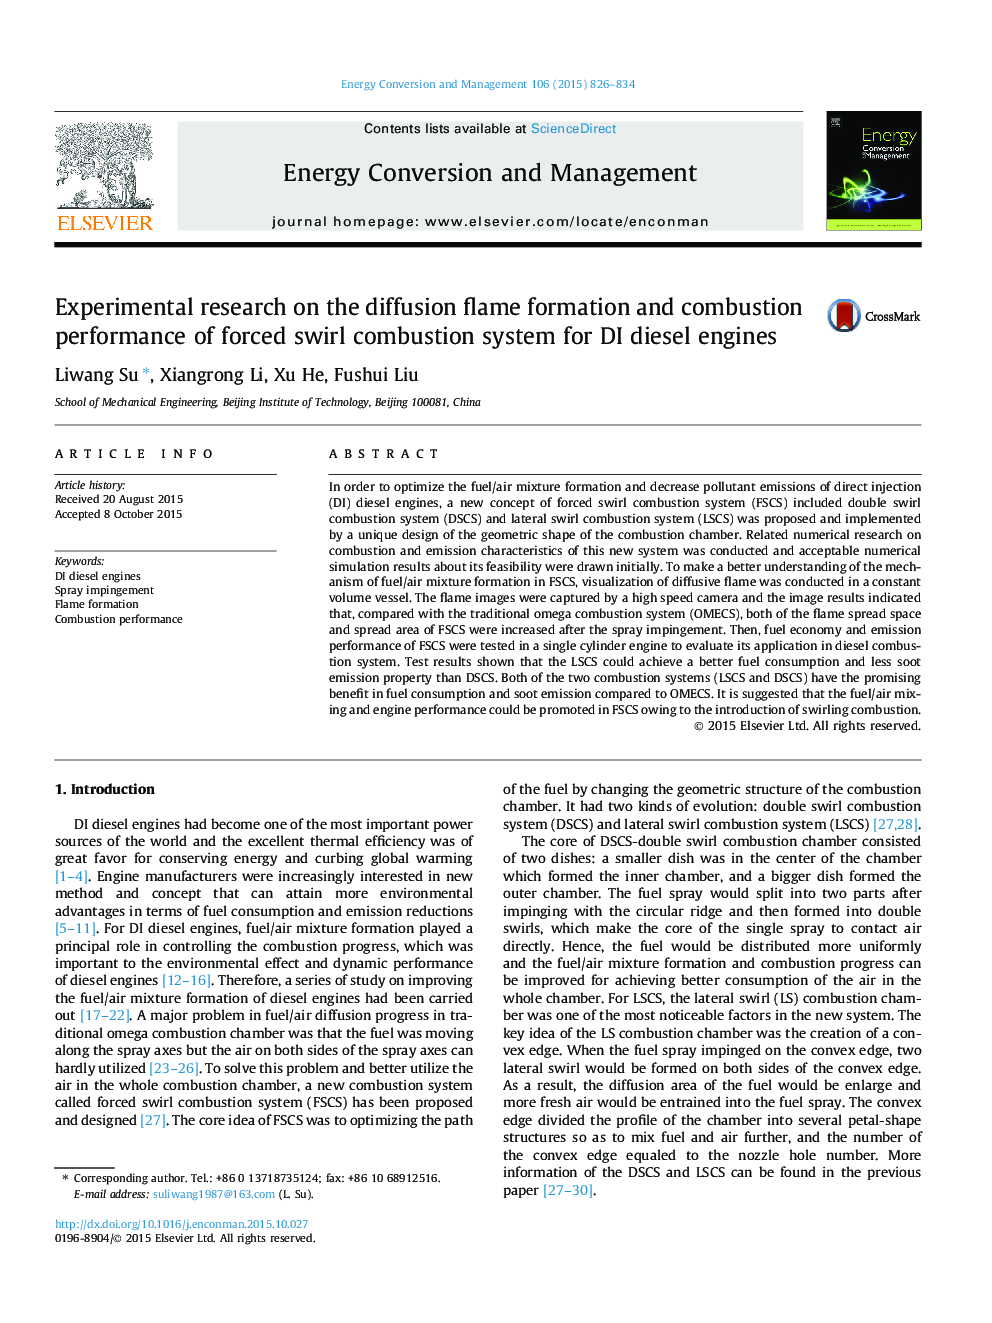 Experimental research on the diffusion flame formation and combustion performance of forced swirl combustion system for DI diesel engines